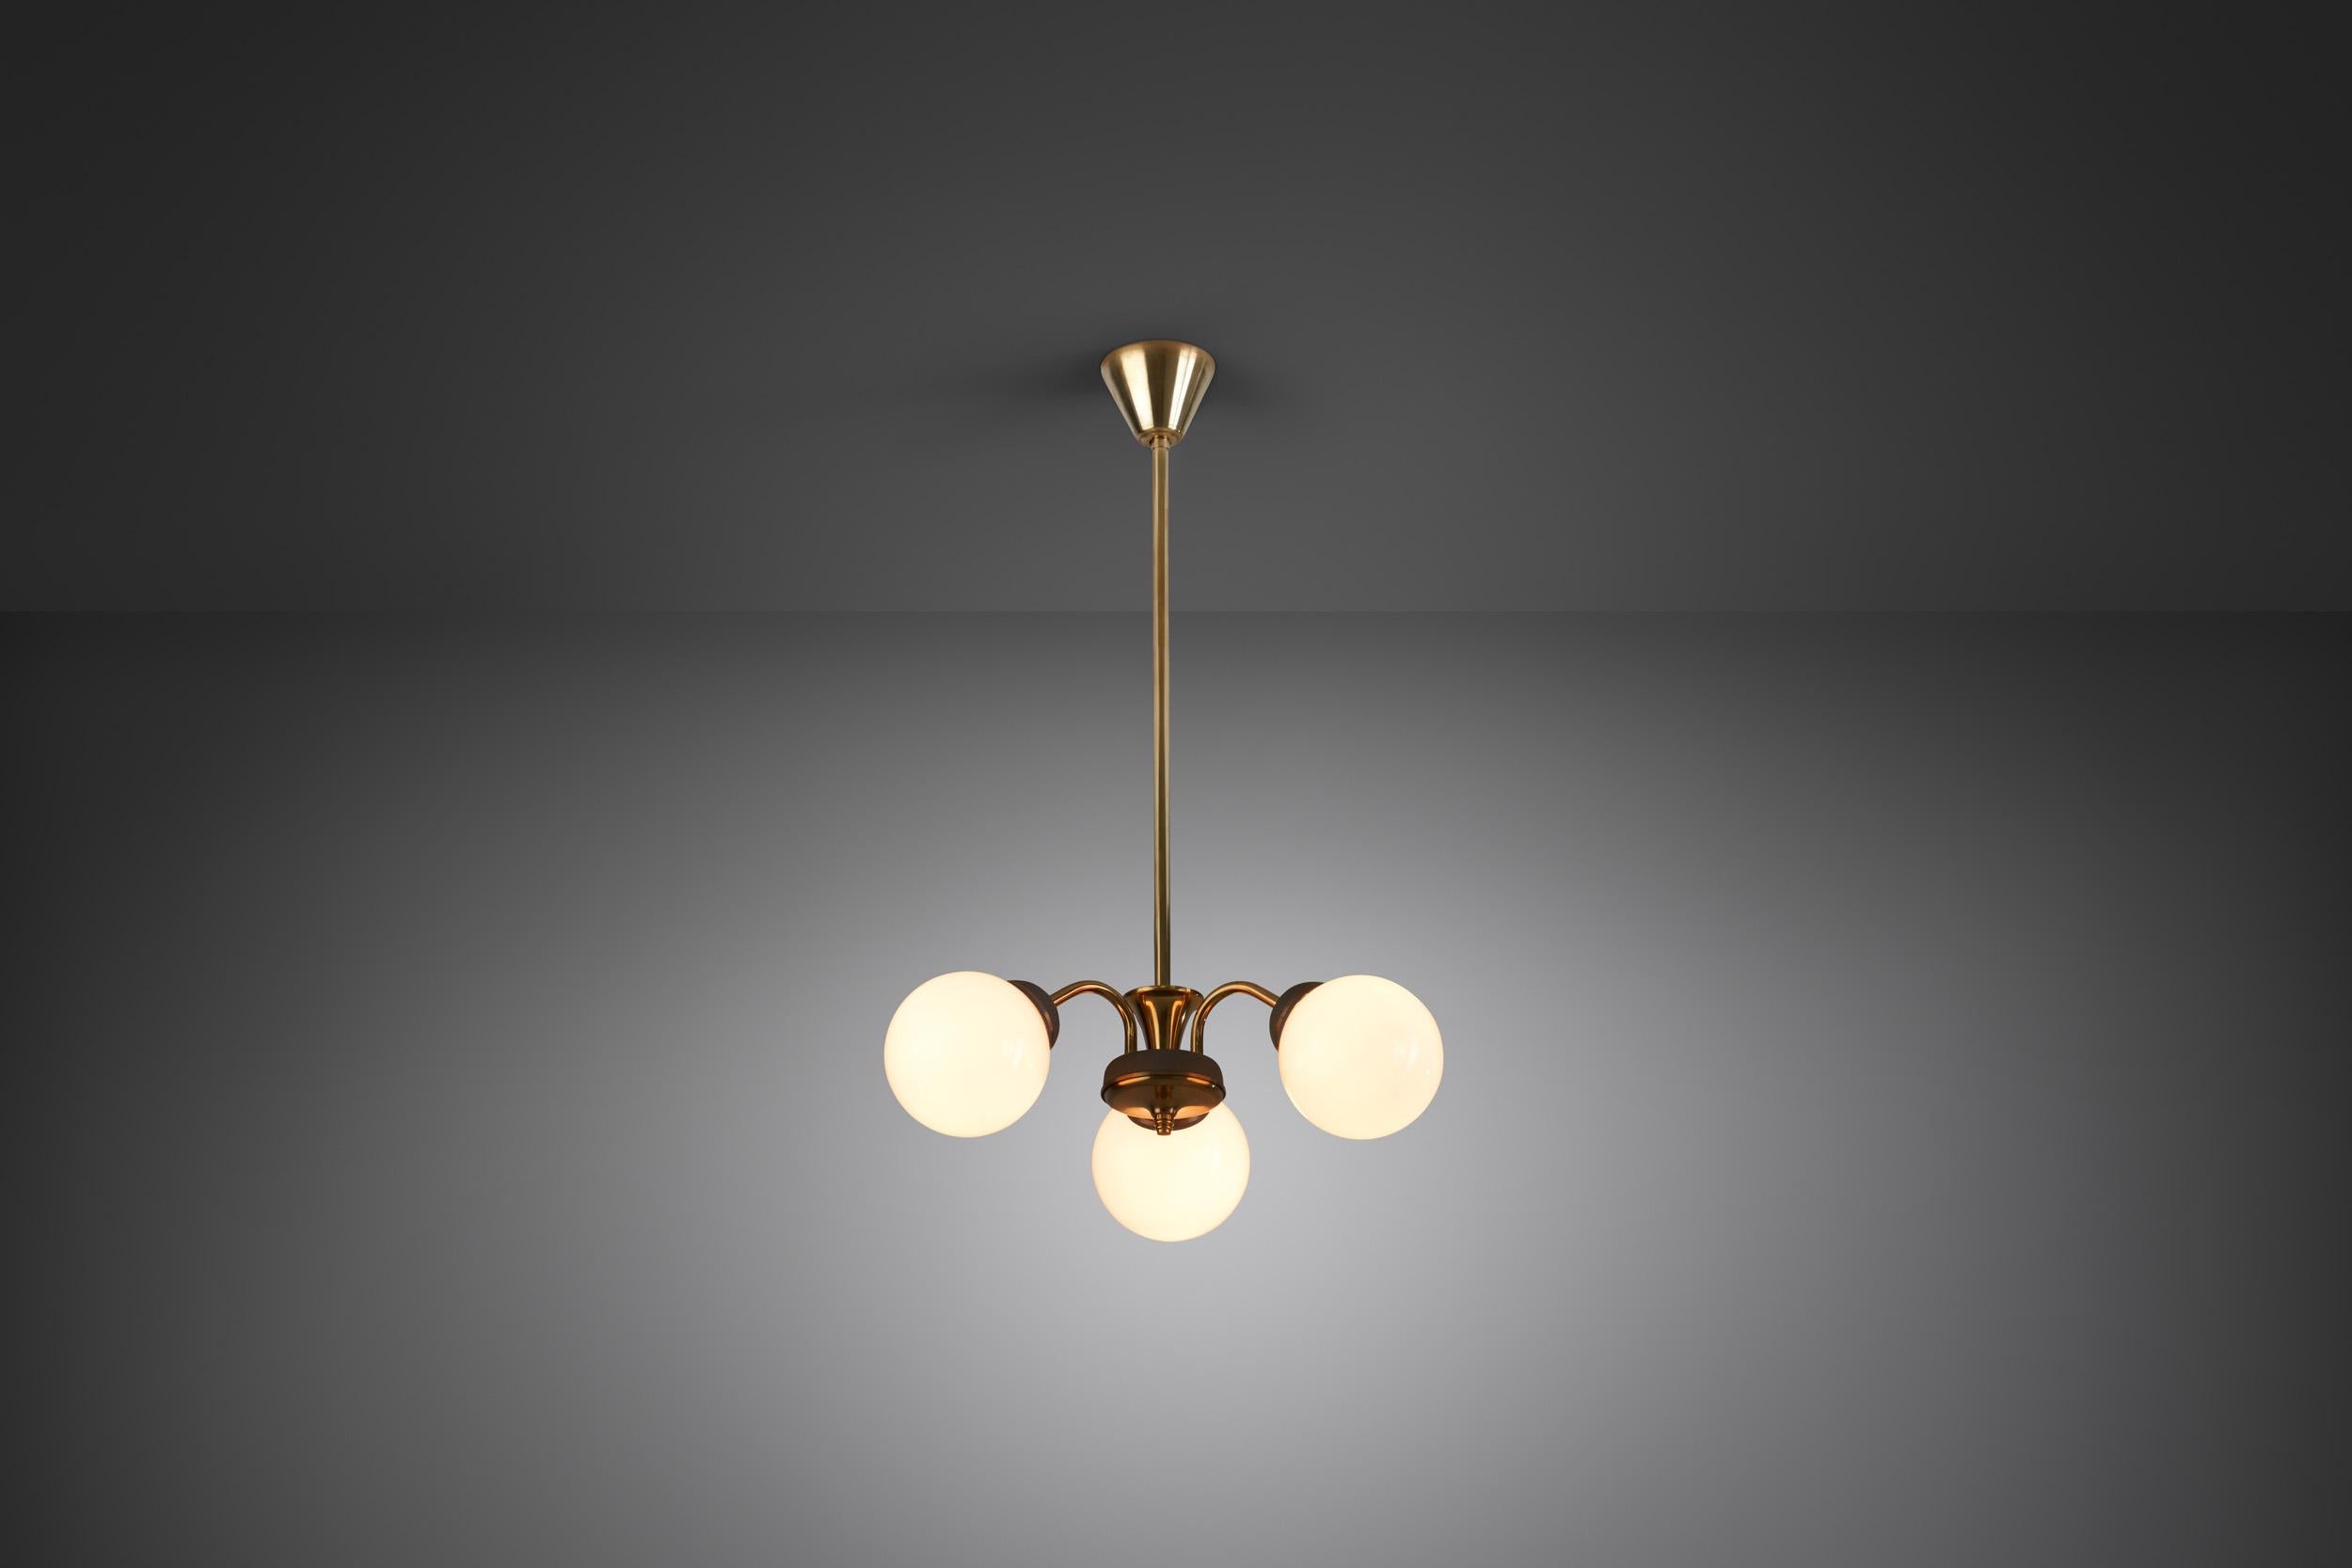 Mid-20th Century Brass Three-Armed Ceiling Lamp with Opal Glass Shades, Scandinavia 1950s For Sale